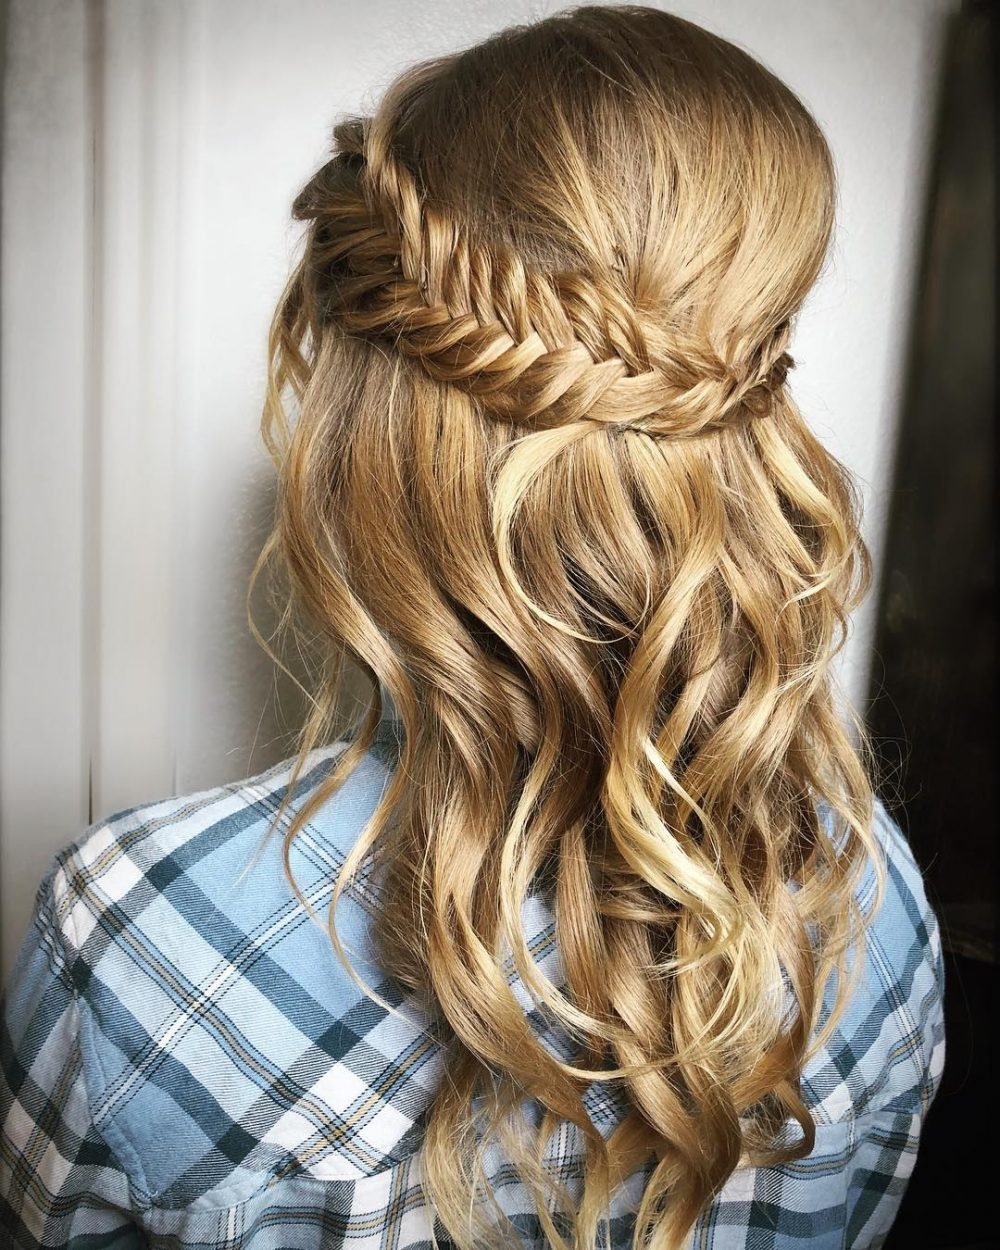 Prom Half Up Half Down Hairstyles
 Half Up Half Down Prom Hairstyles and How To s